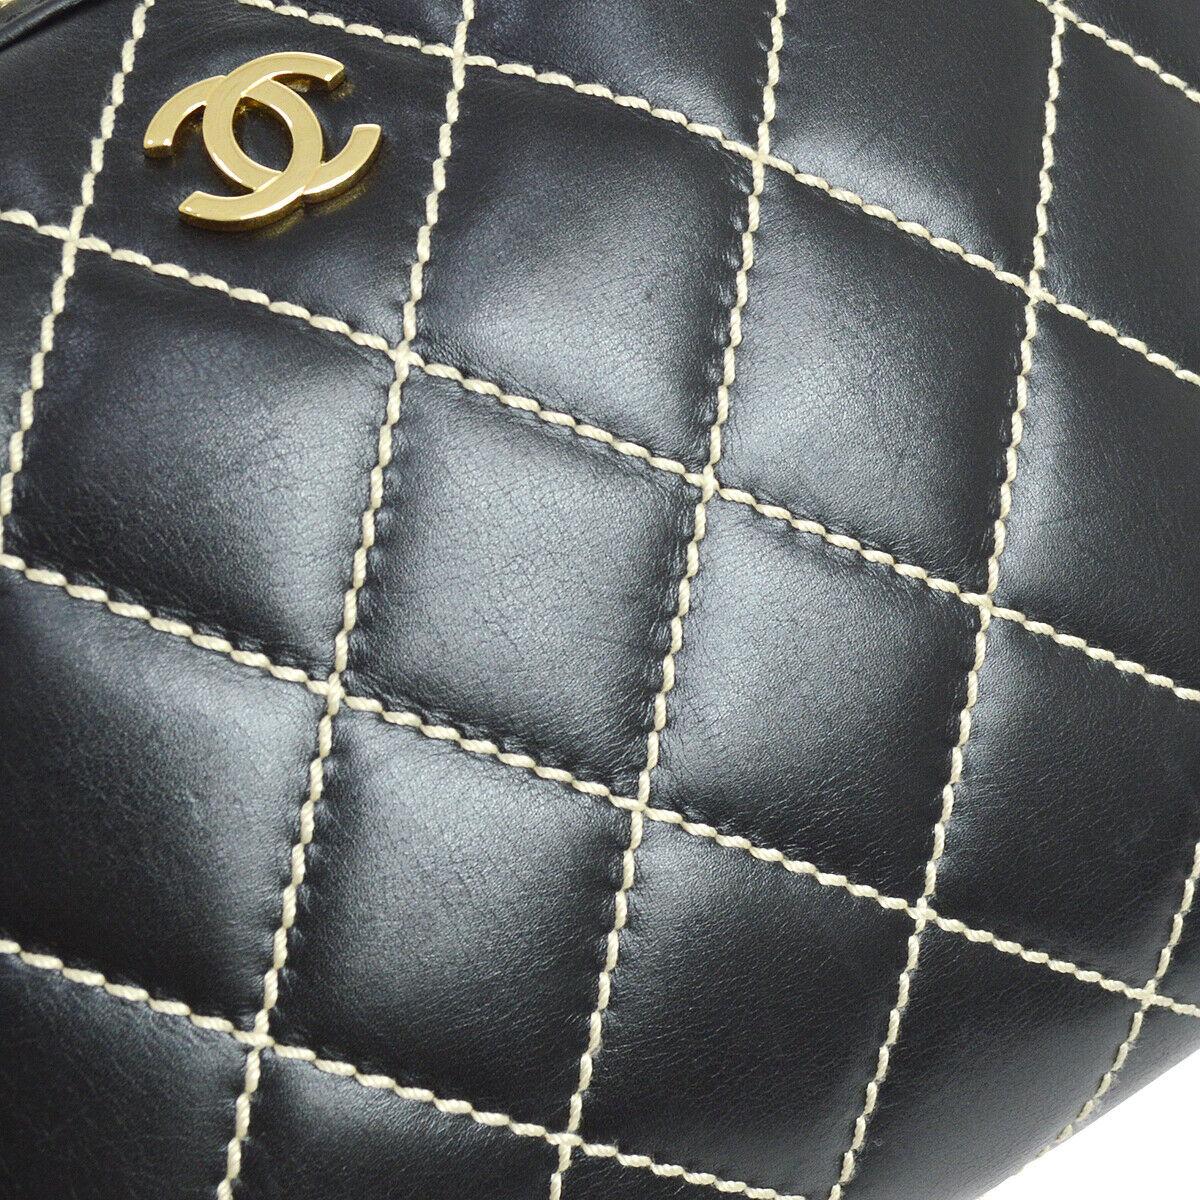 Chanel Black Leather Gold Carryall Travel Stitch Top Handle Satchel Bag

Leather
Stitch 
Gold tone hardware
Zipper closure
Woven lining
Made in Italy
Date code present
Handle drop 6.25